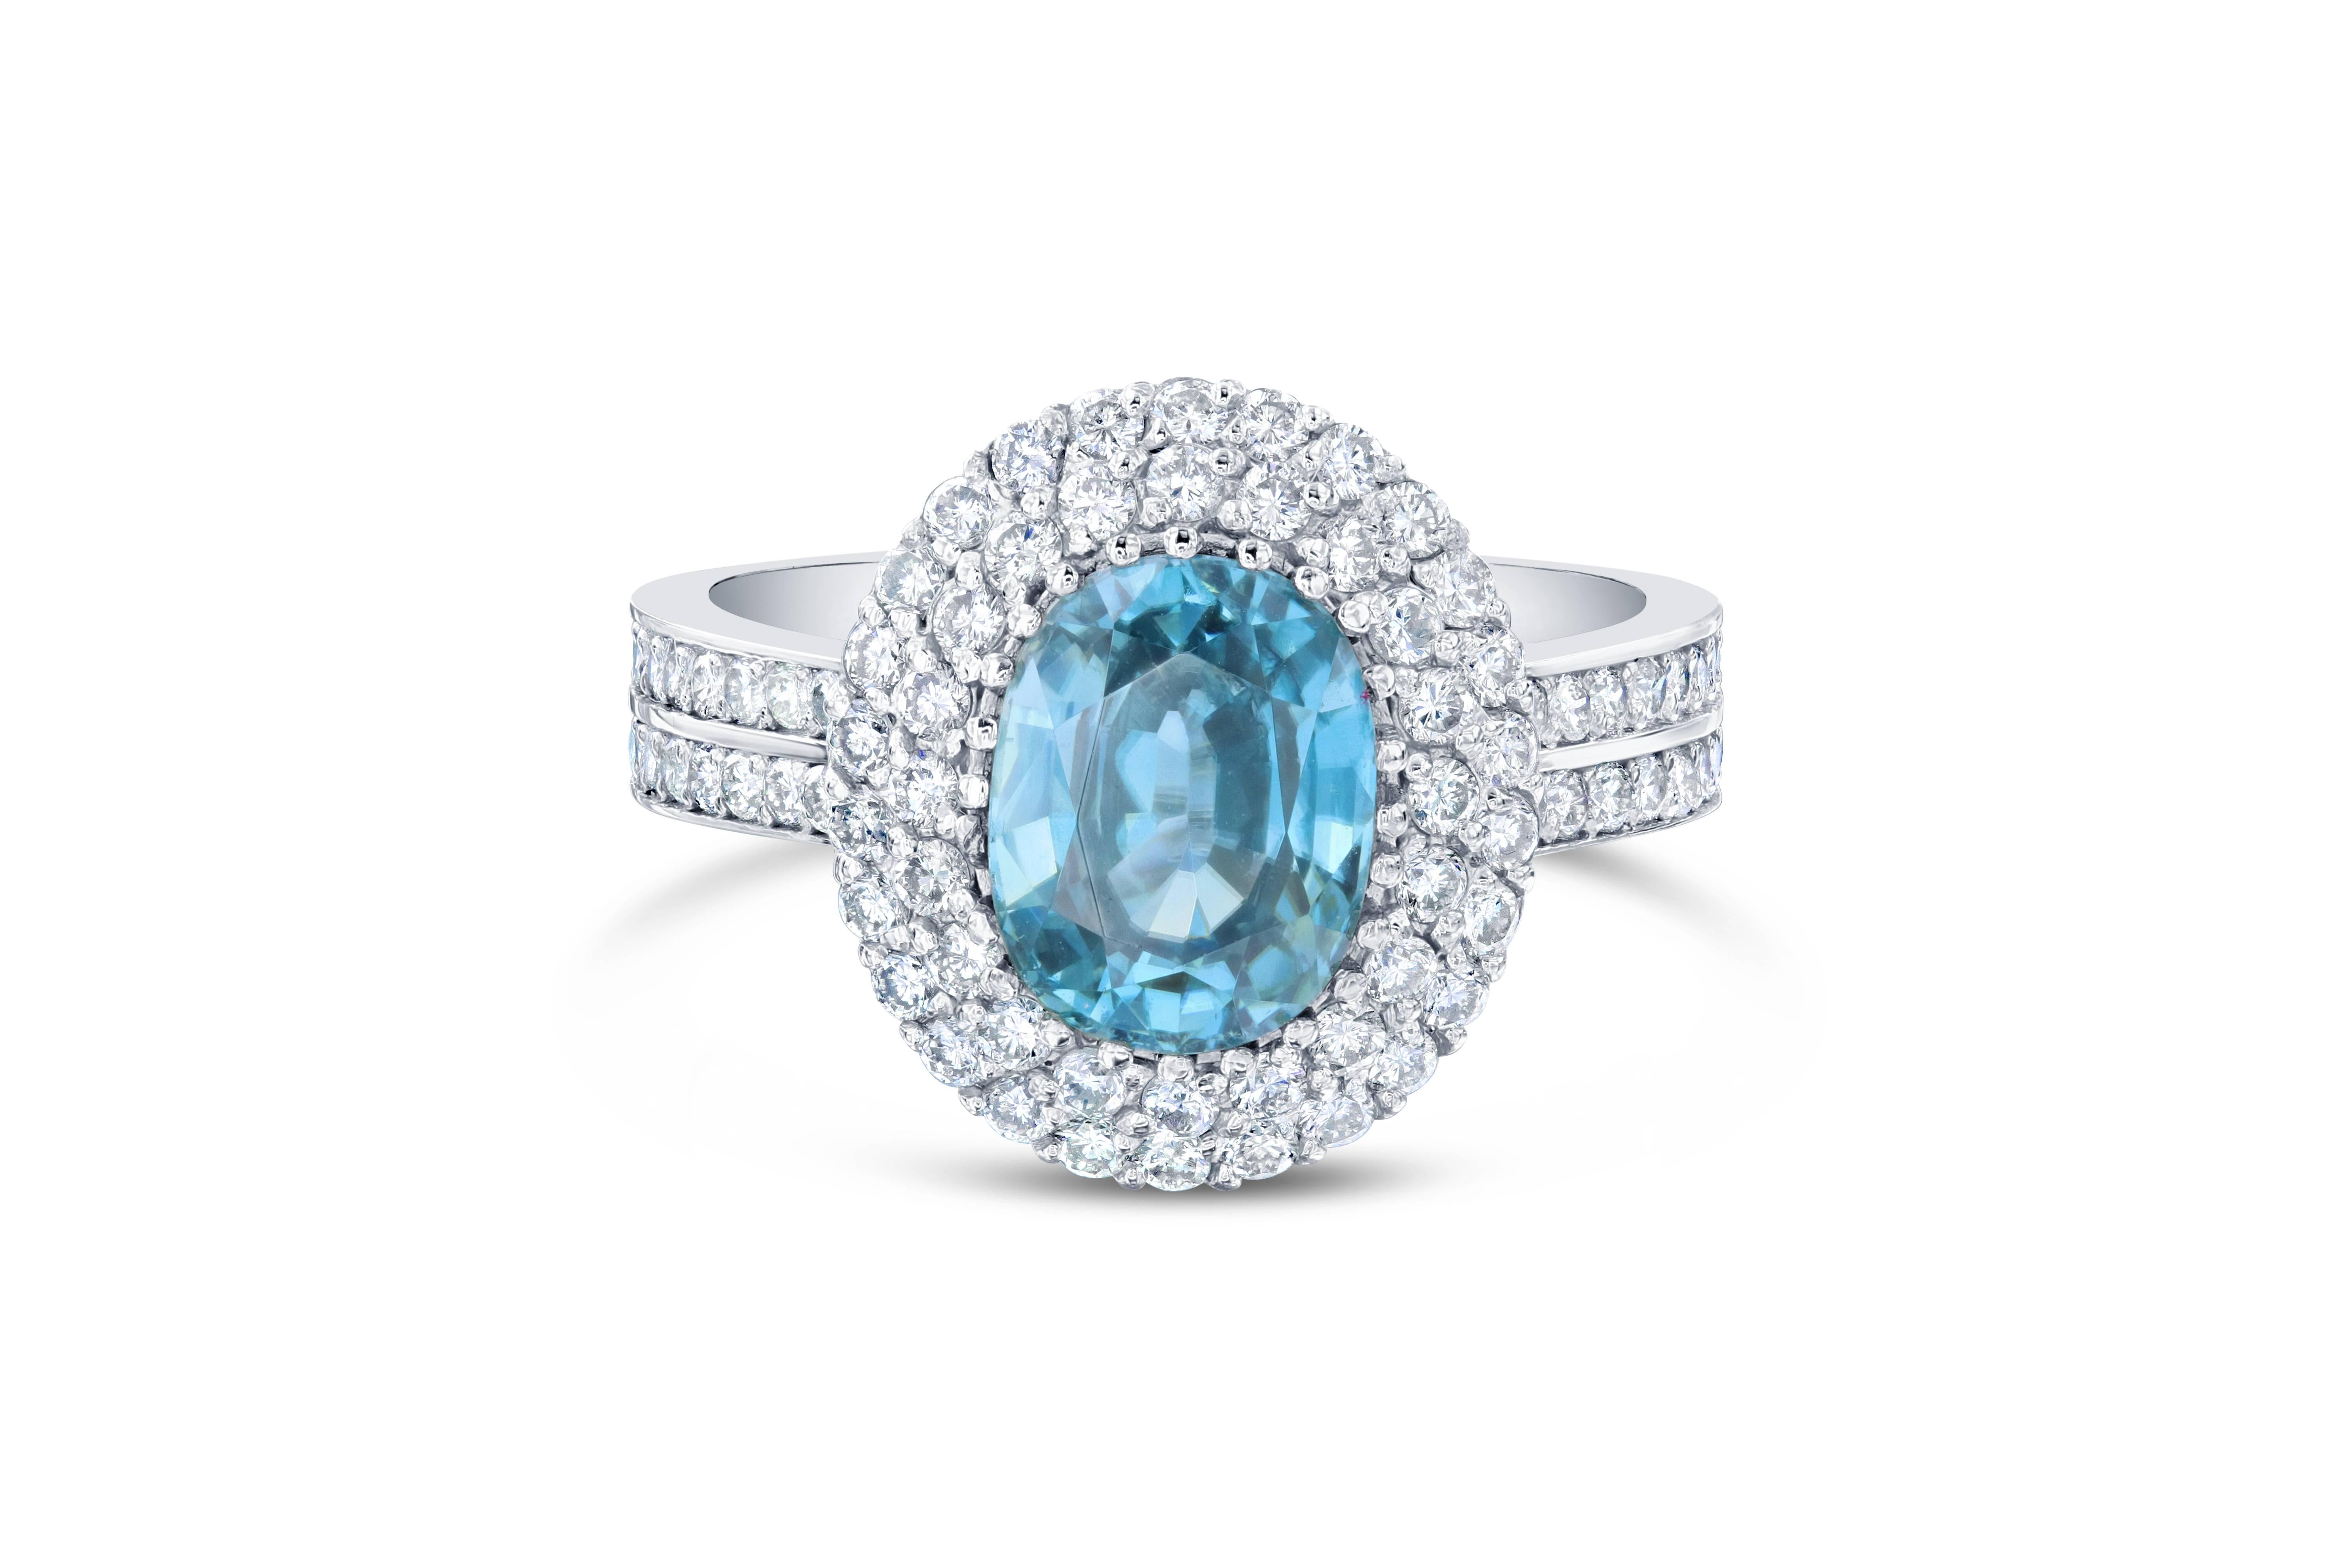 A Dazzling Blue Zircon and Diamond Ring! Blue Zircon is a natural stone mined in different parts of the world, mainly Sri Lanka, Myanmar, and Australia. 

This Oval Cut Blue Zircon is 3.53 Carats surrounded by a double halo of 82 Round Cut Diamonds